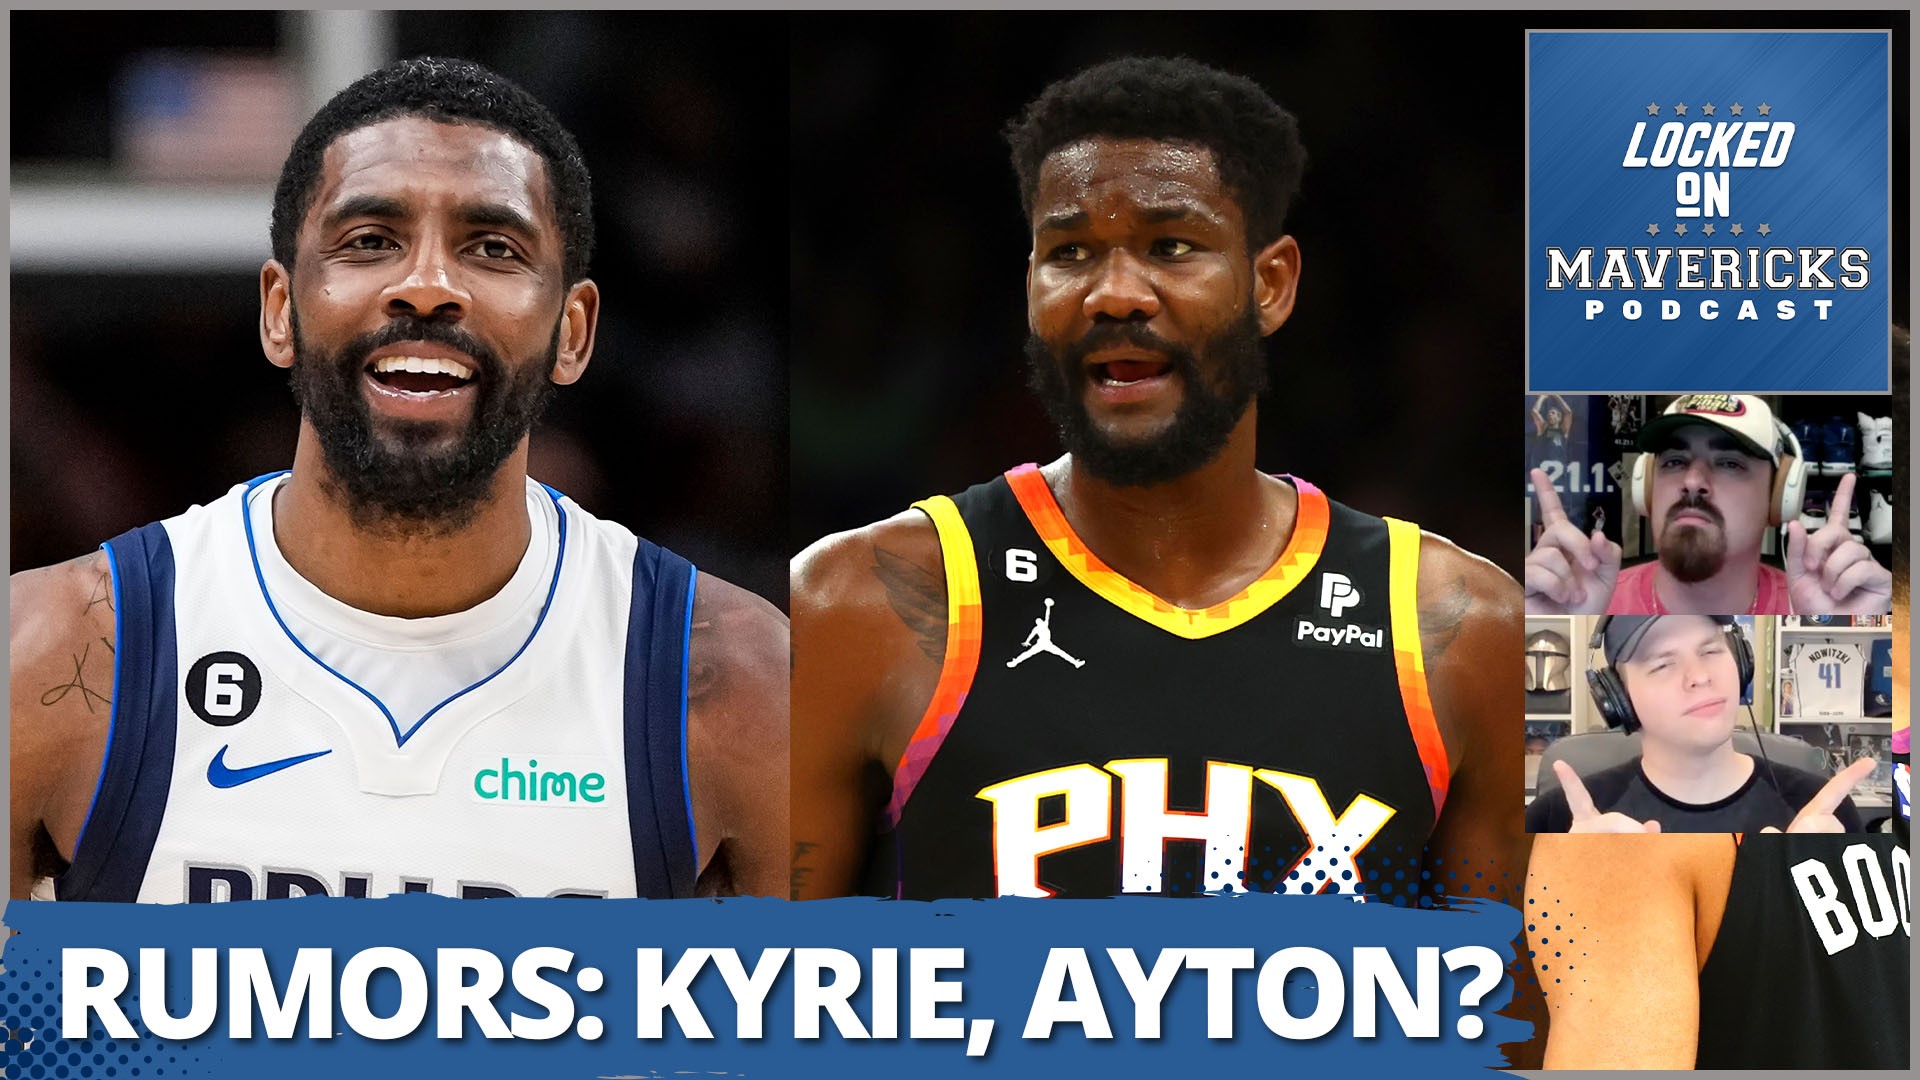 Nick Angstadt & Isaac Harris discuss the Dallas Mavericks rumors about Kyrie Irving's deal, a Deandre Ayton trade rumor, and the Mavs Draft pick.